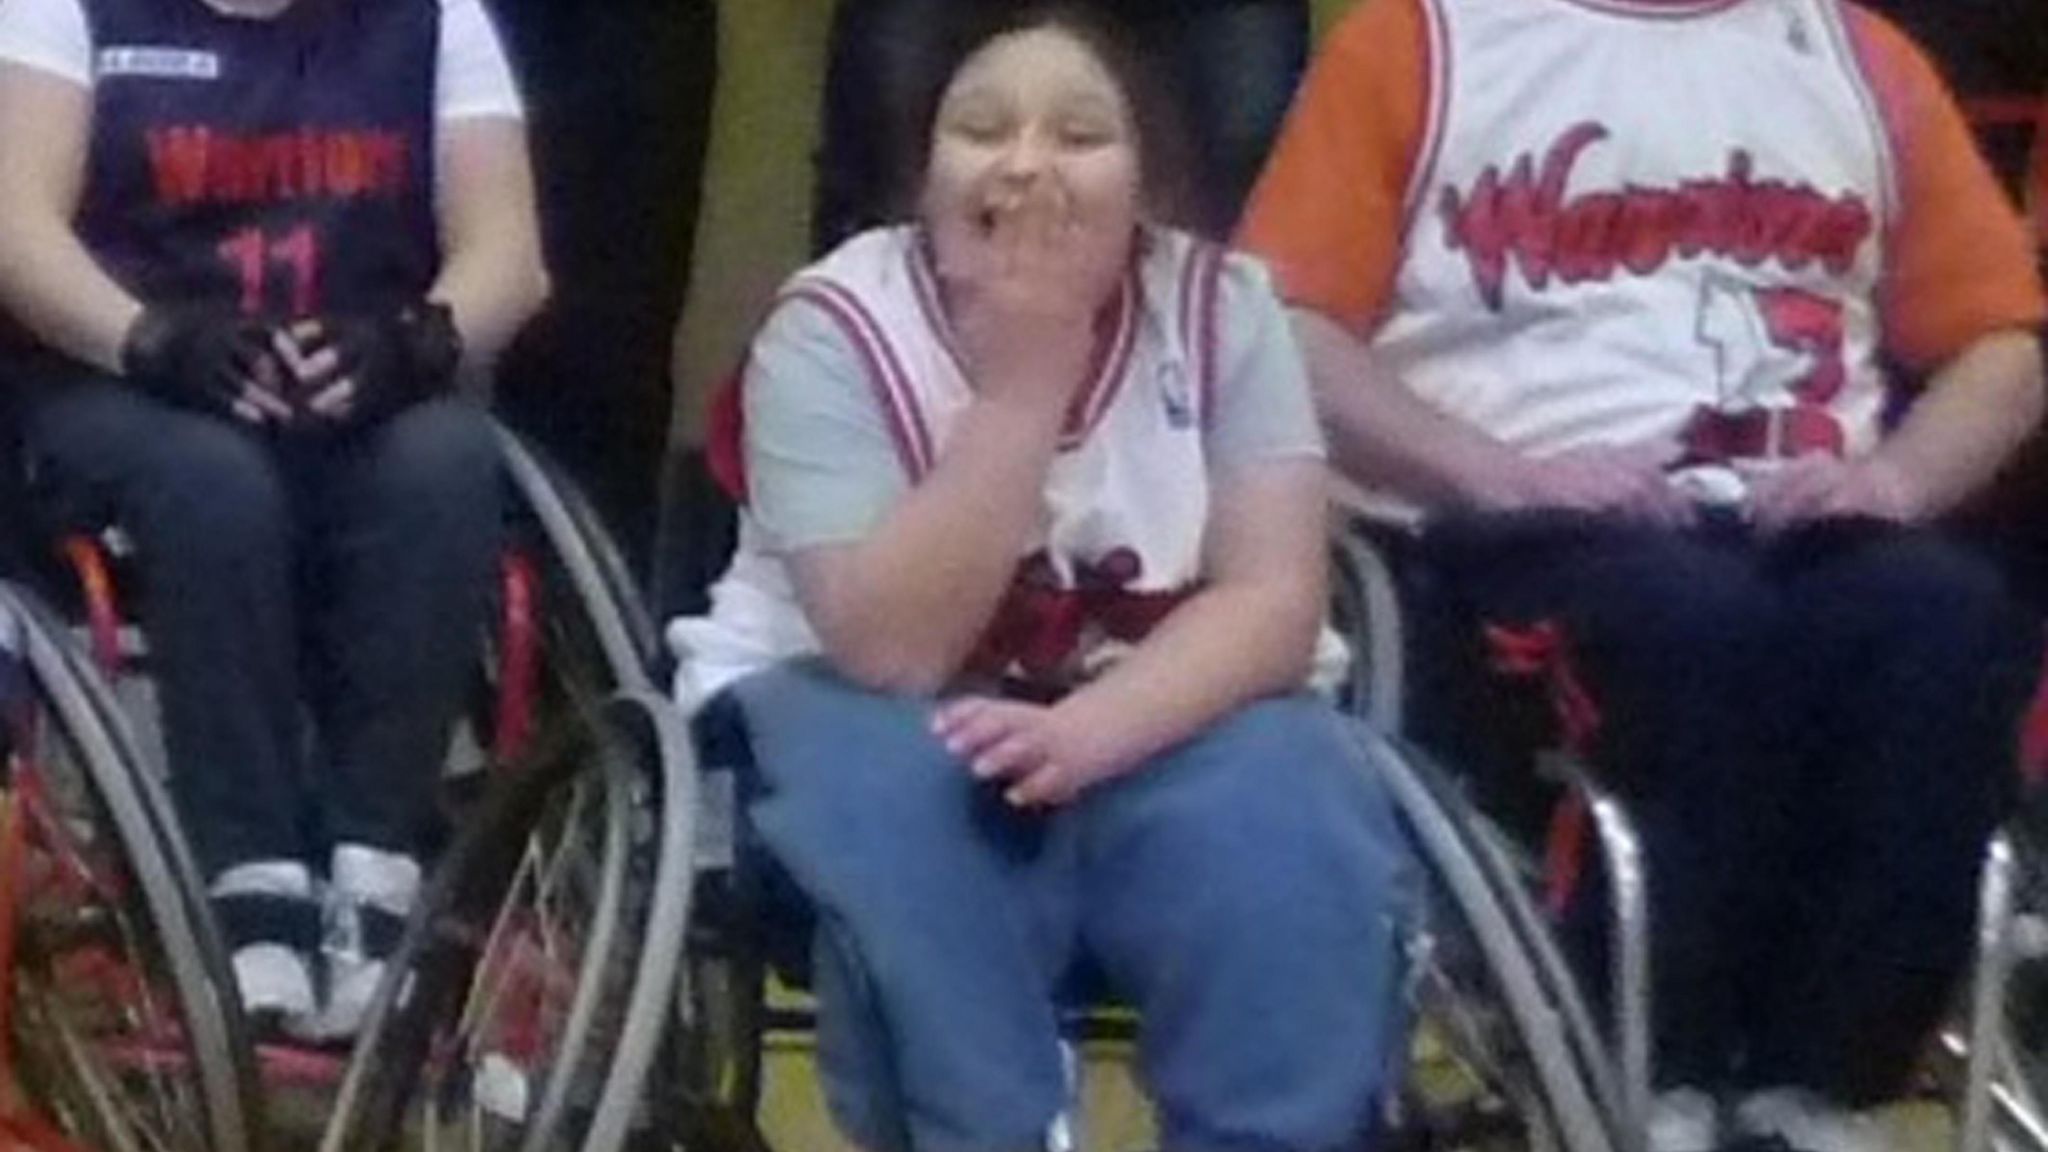 Kaylea in a wheelchair with a big smile and a hand over her mouth.